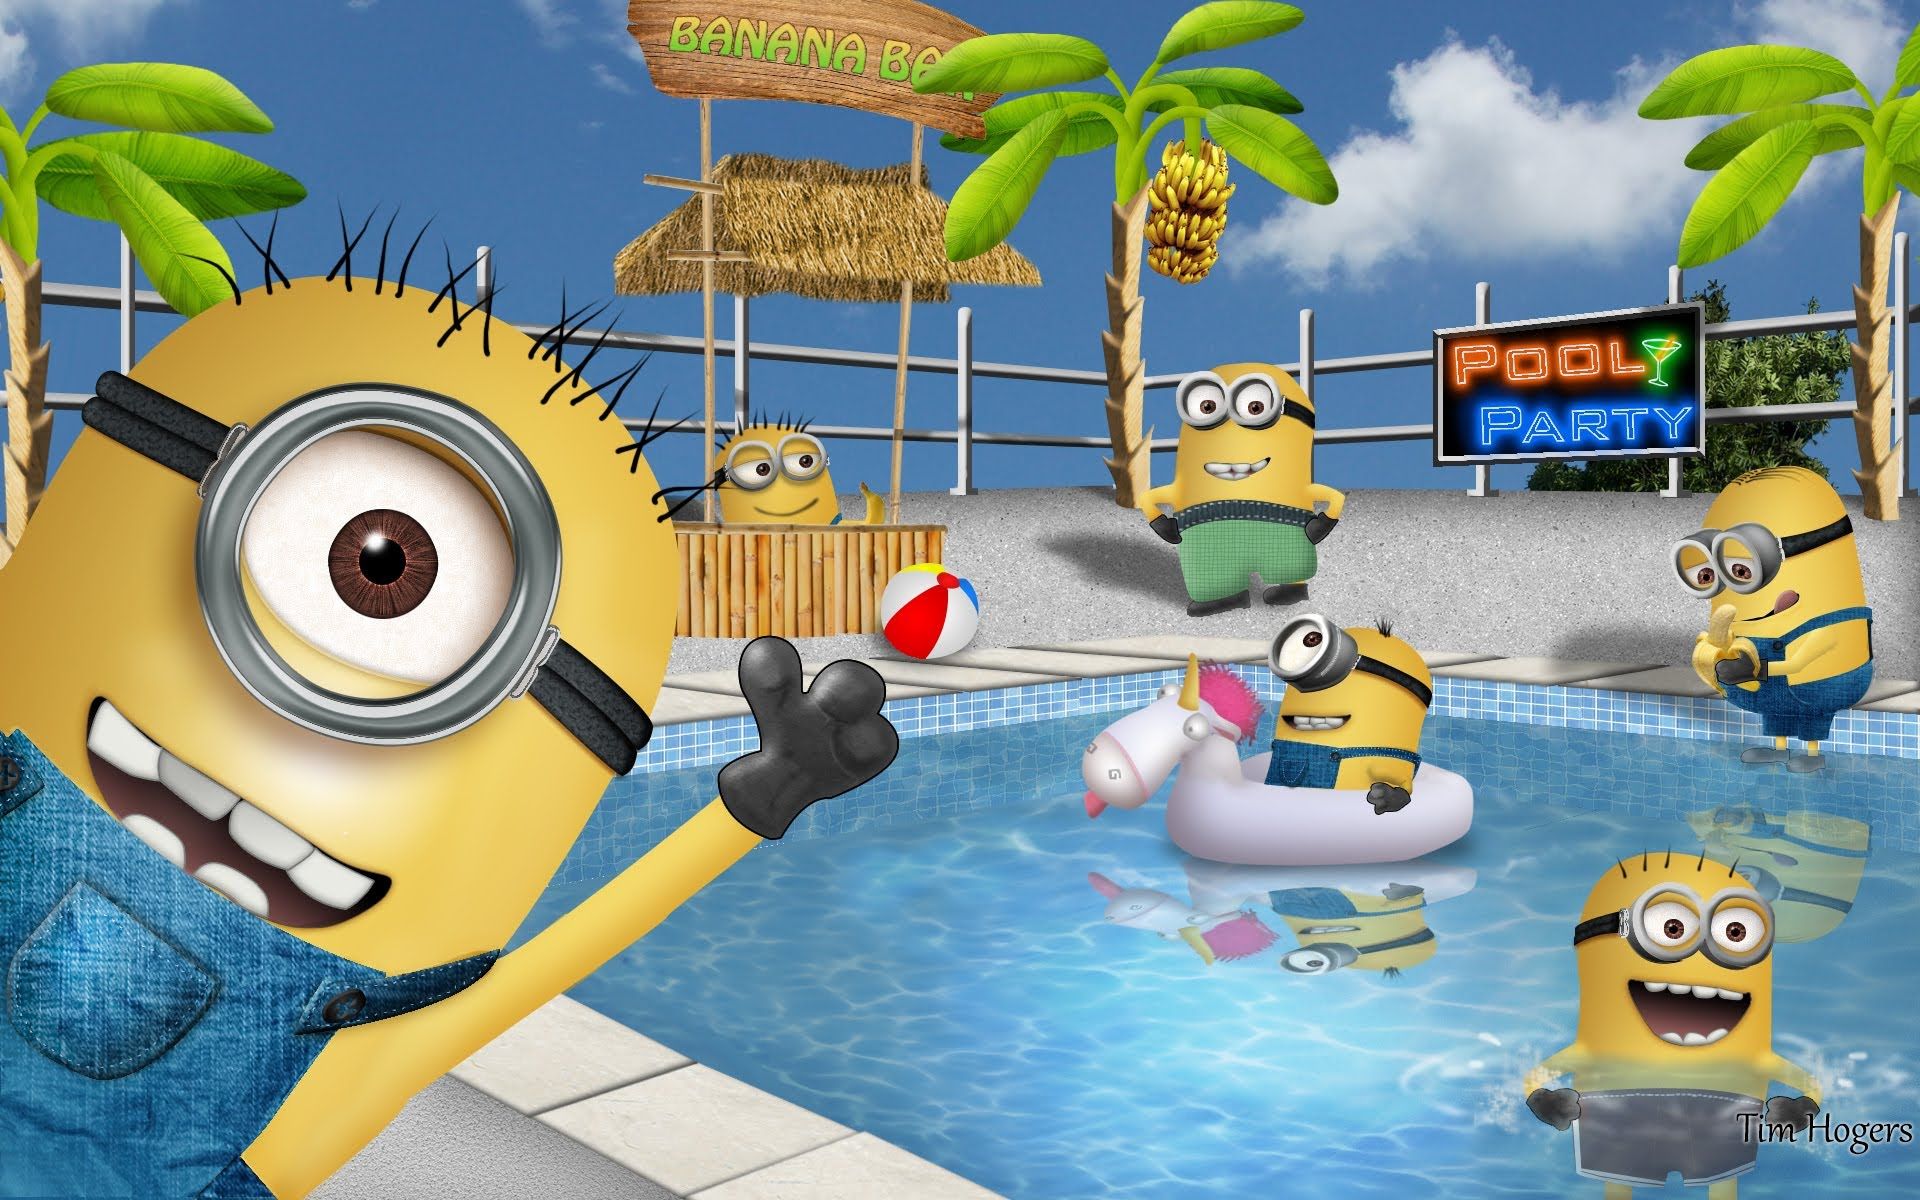 Despicable me 2 - Minion pool party - speedart from scratch ...